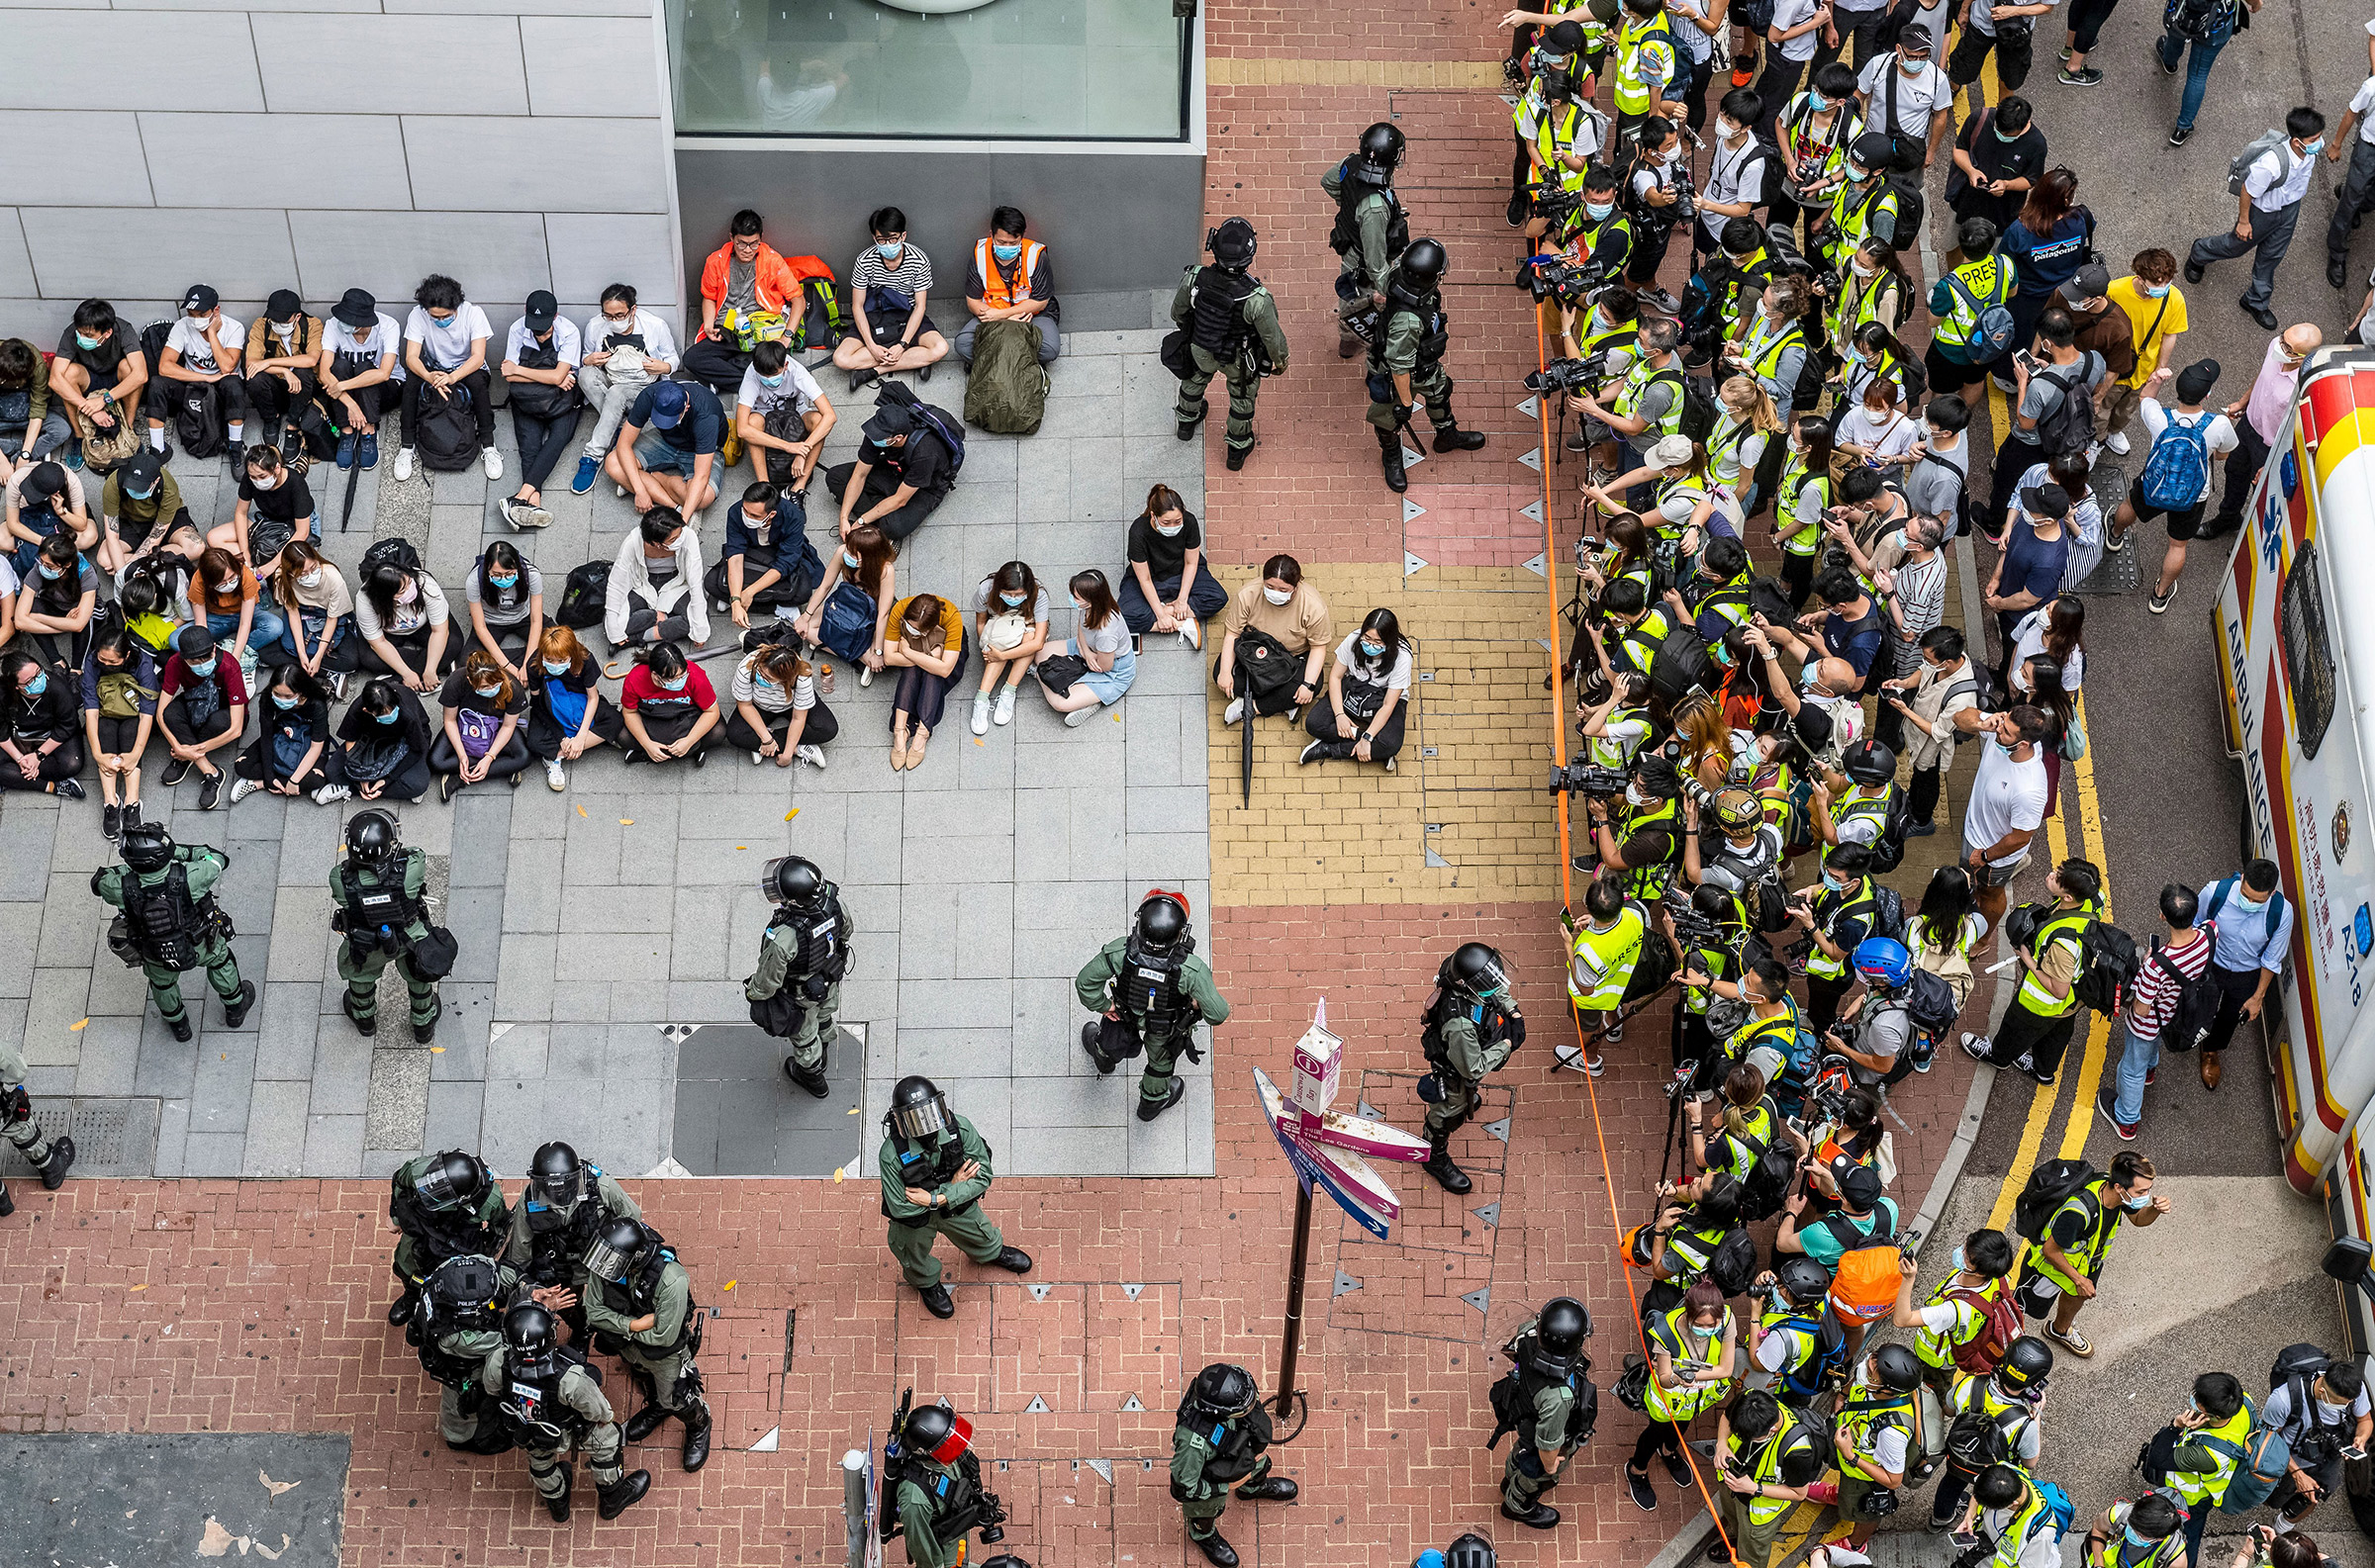 Police circle detainees near the city’s legislature on May 27, as the debate over the national-security bill was set to resume (Miguel Candela—EPA-EFE/Shutterstock)